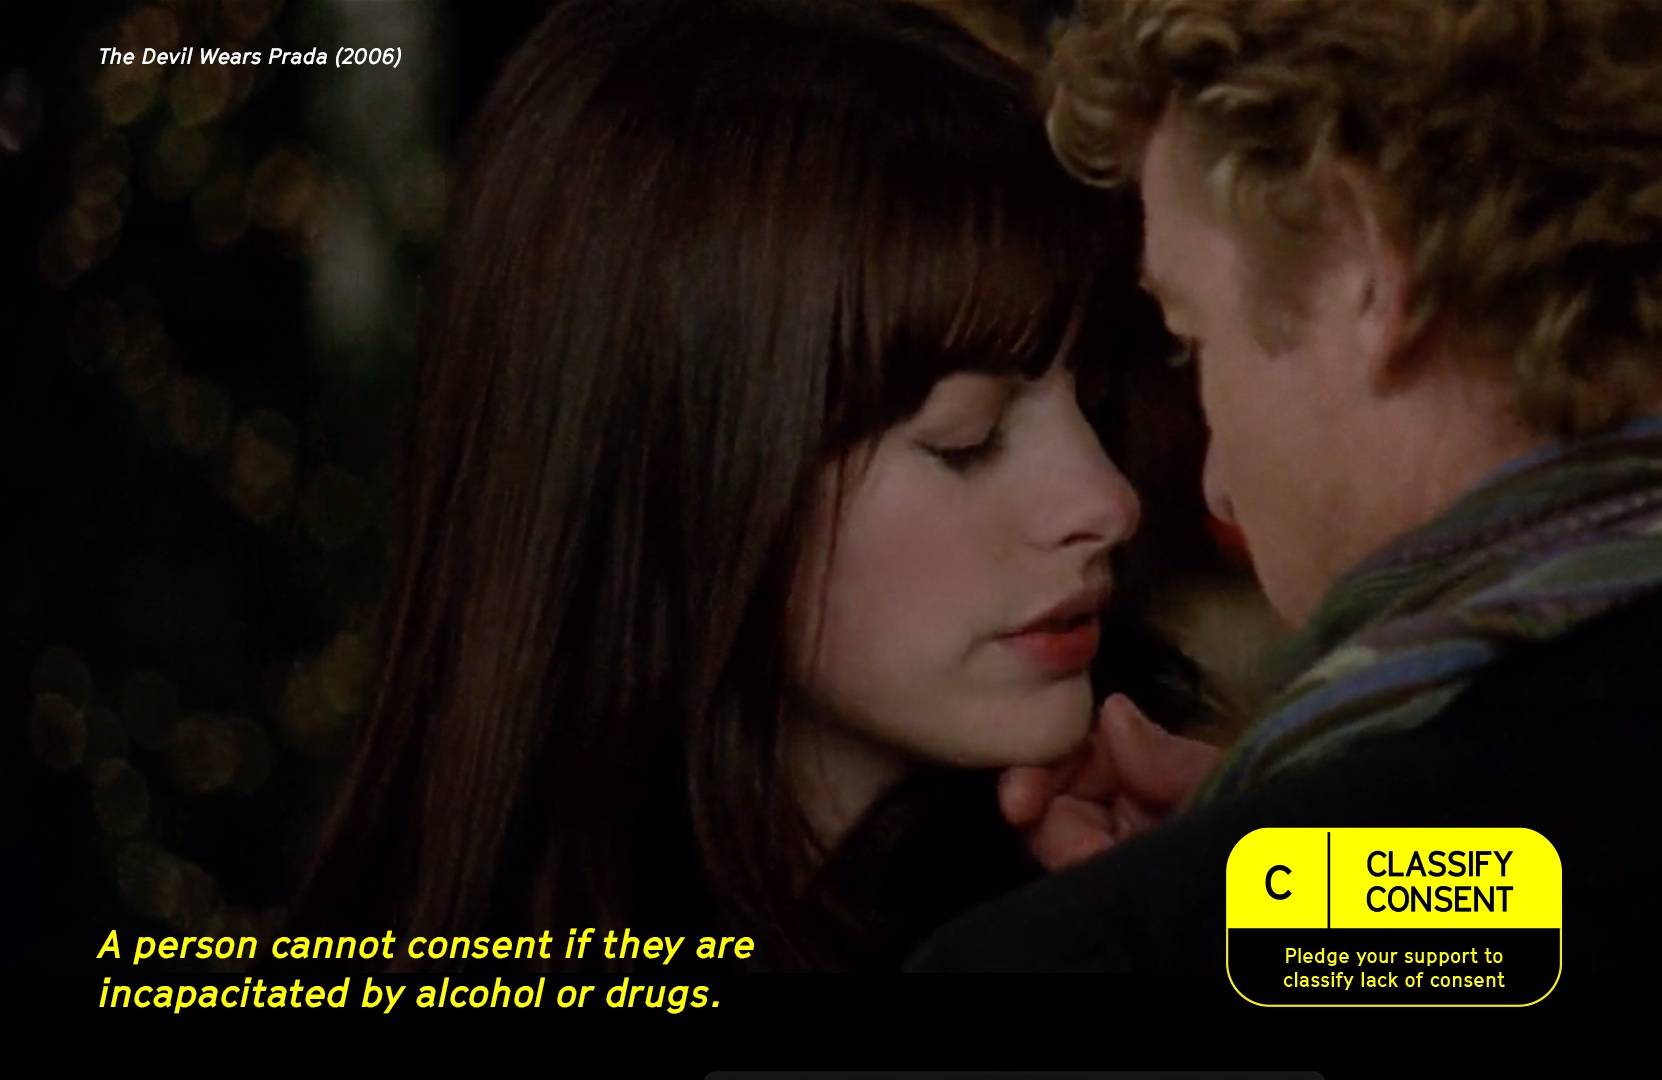 A scene from "The Devil Wears Prada" shows the main character being kissed after she said she's drank too much wine. The classify consent rating appears on screen to denote this is an example of non-consensual behavior.